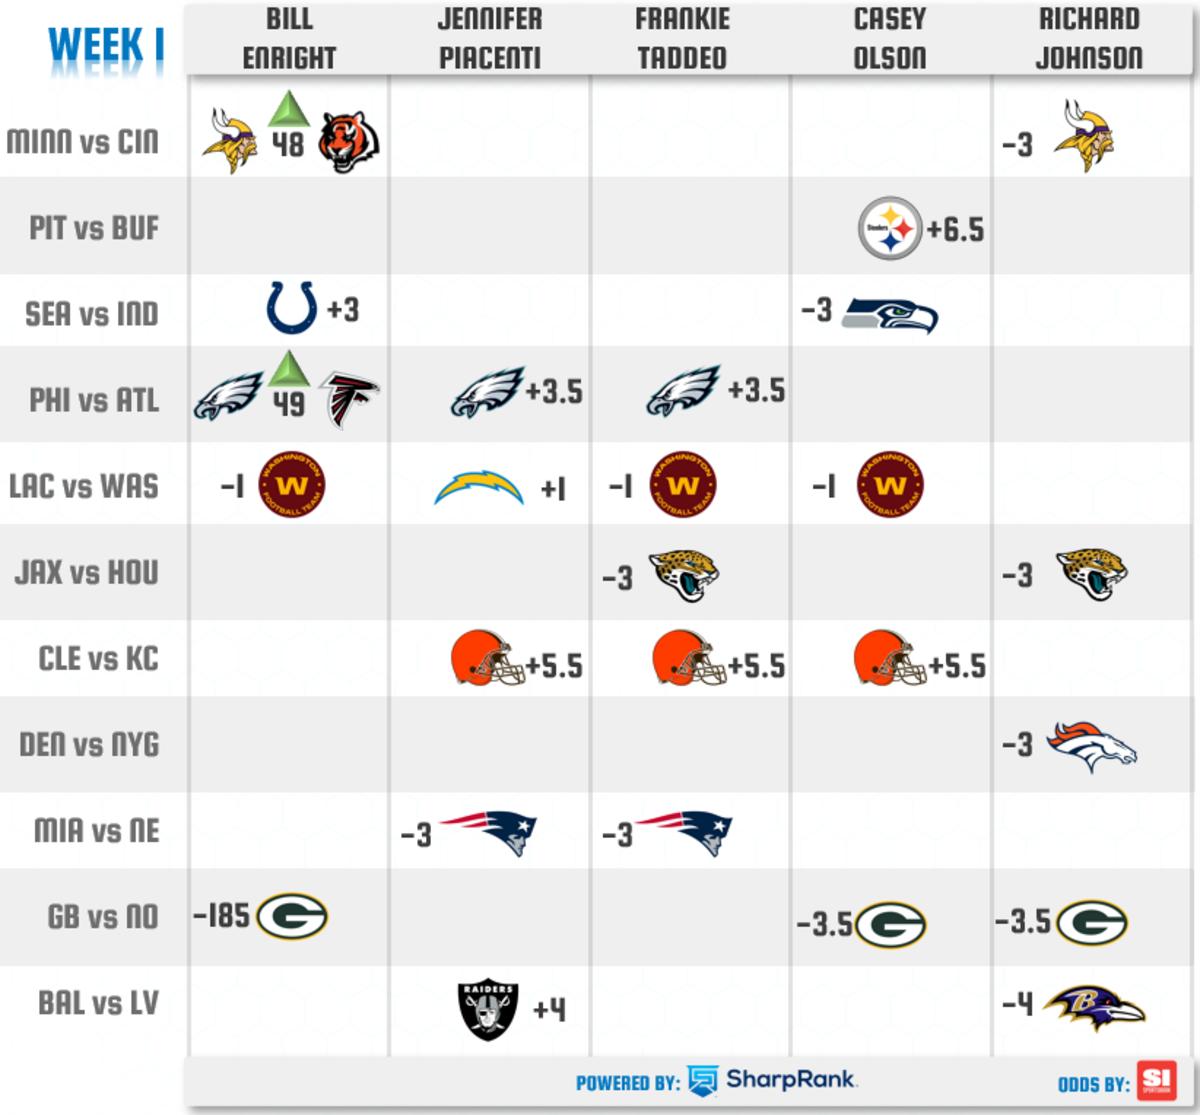 nfl predictions against the spread week 1